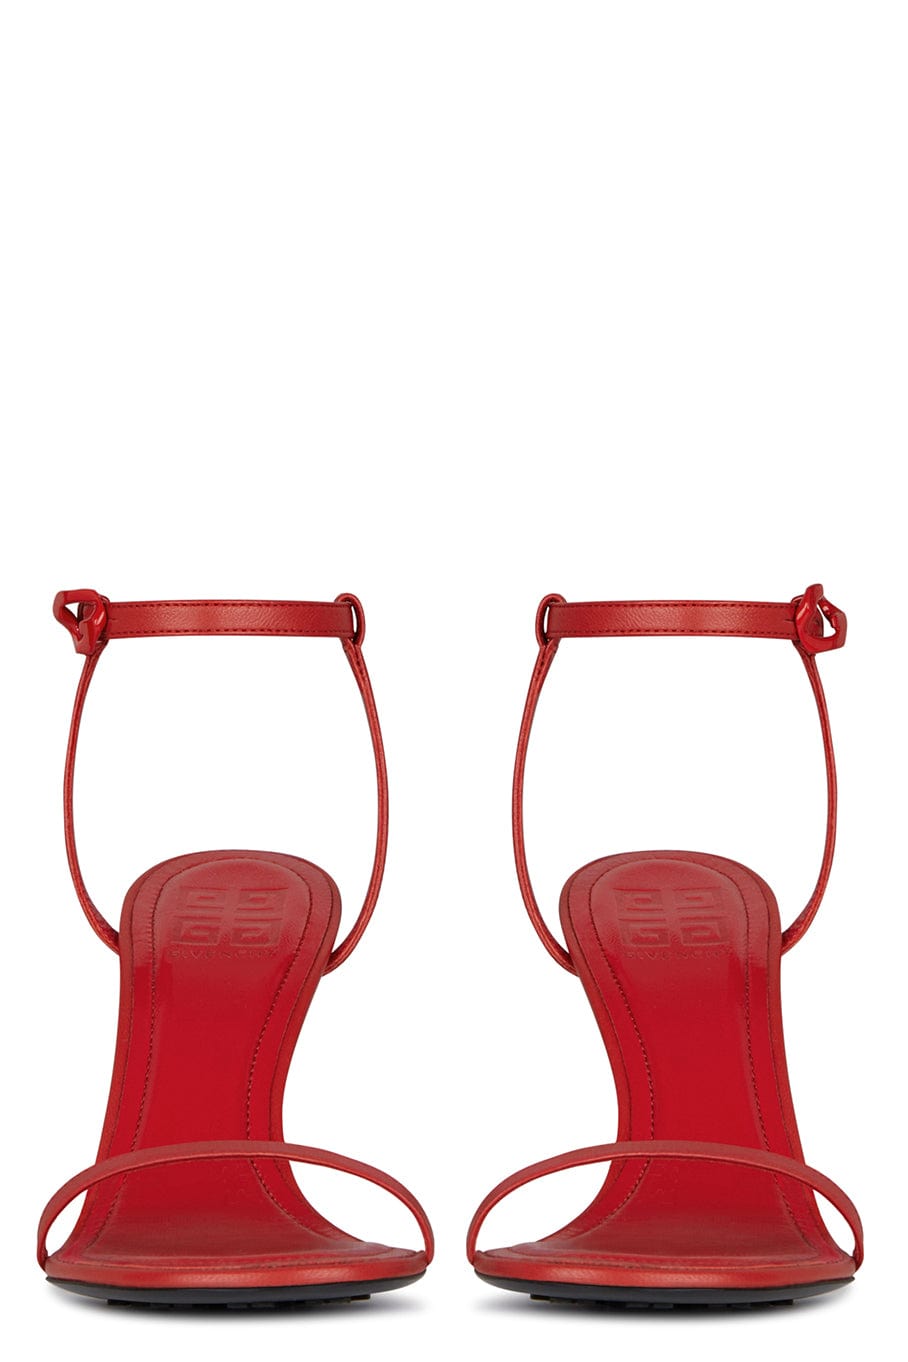 GIVENCHY-G Cube Sandal - Red-